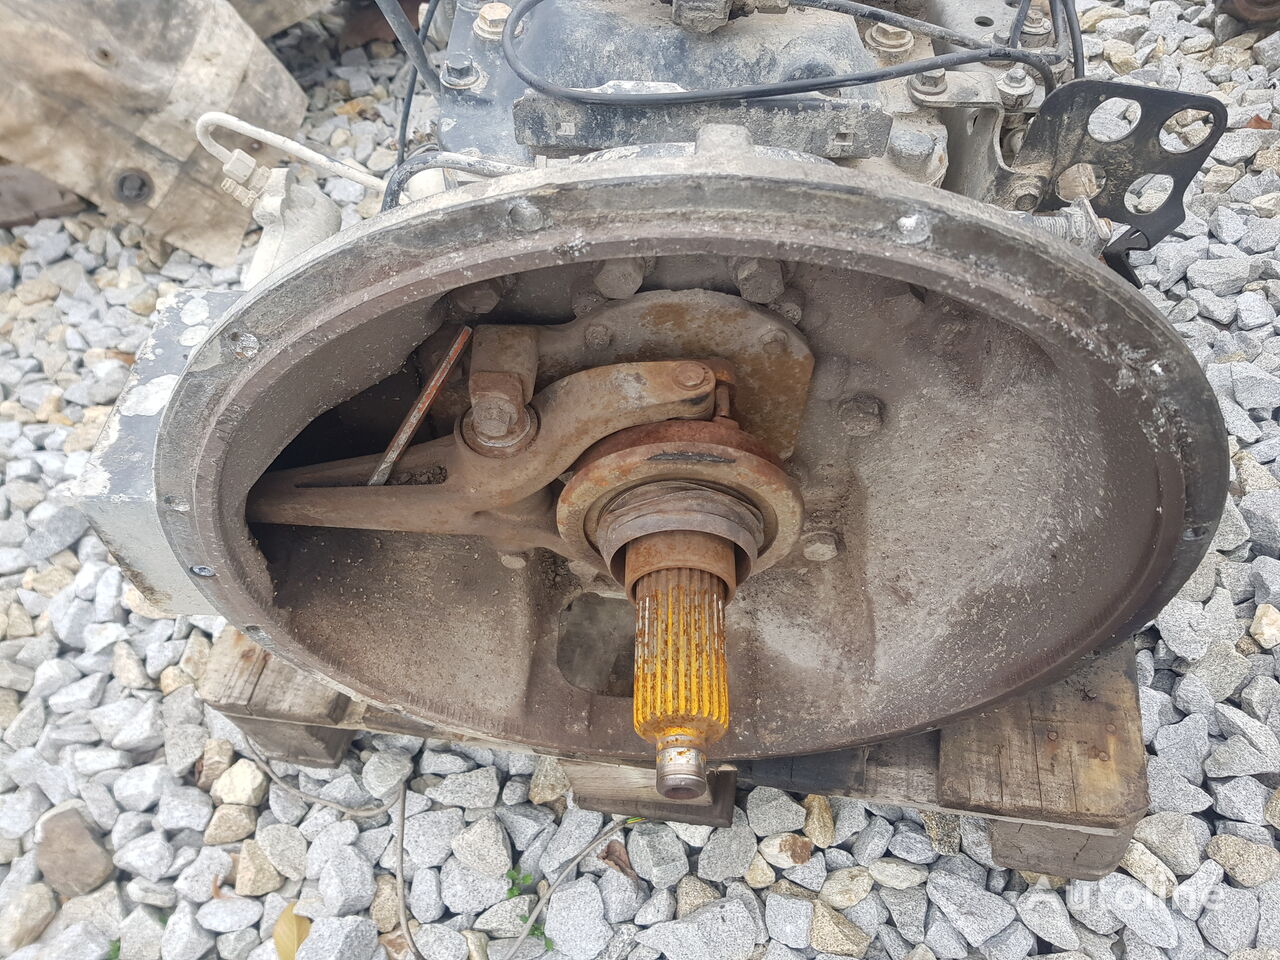 Scania Grs 890r grs890r gearbox for Scania R truck tractor